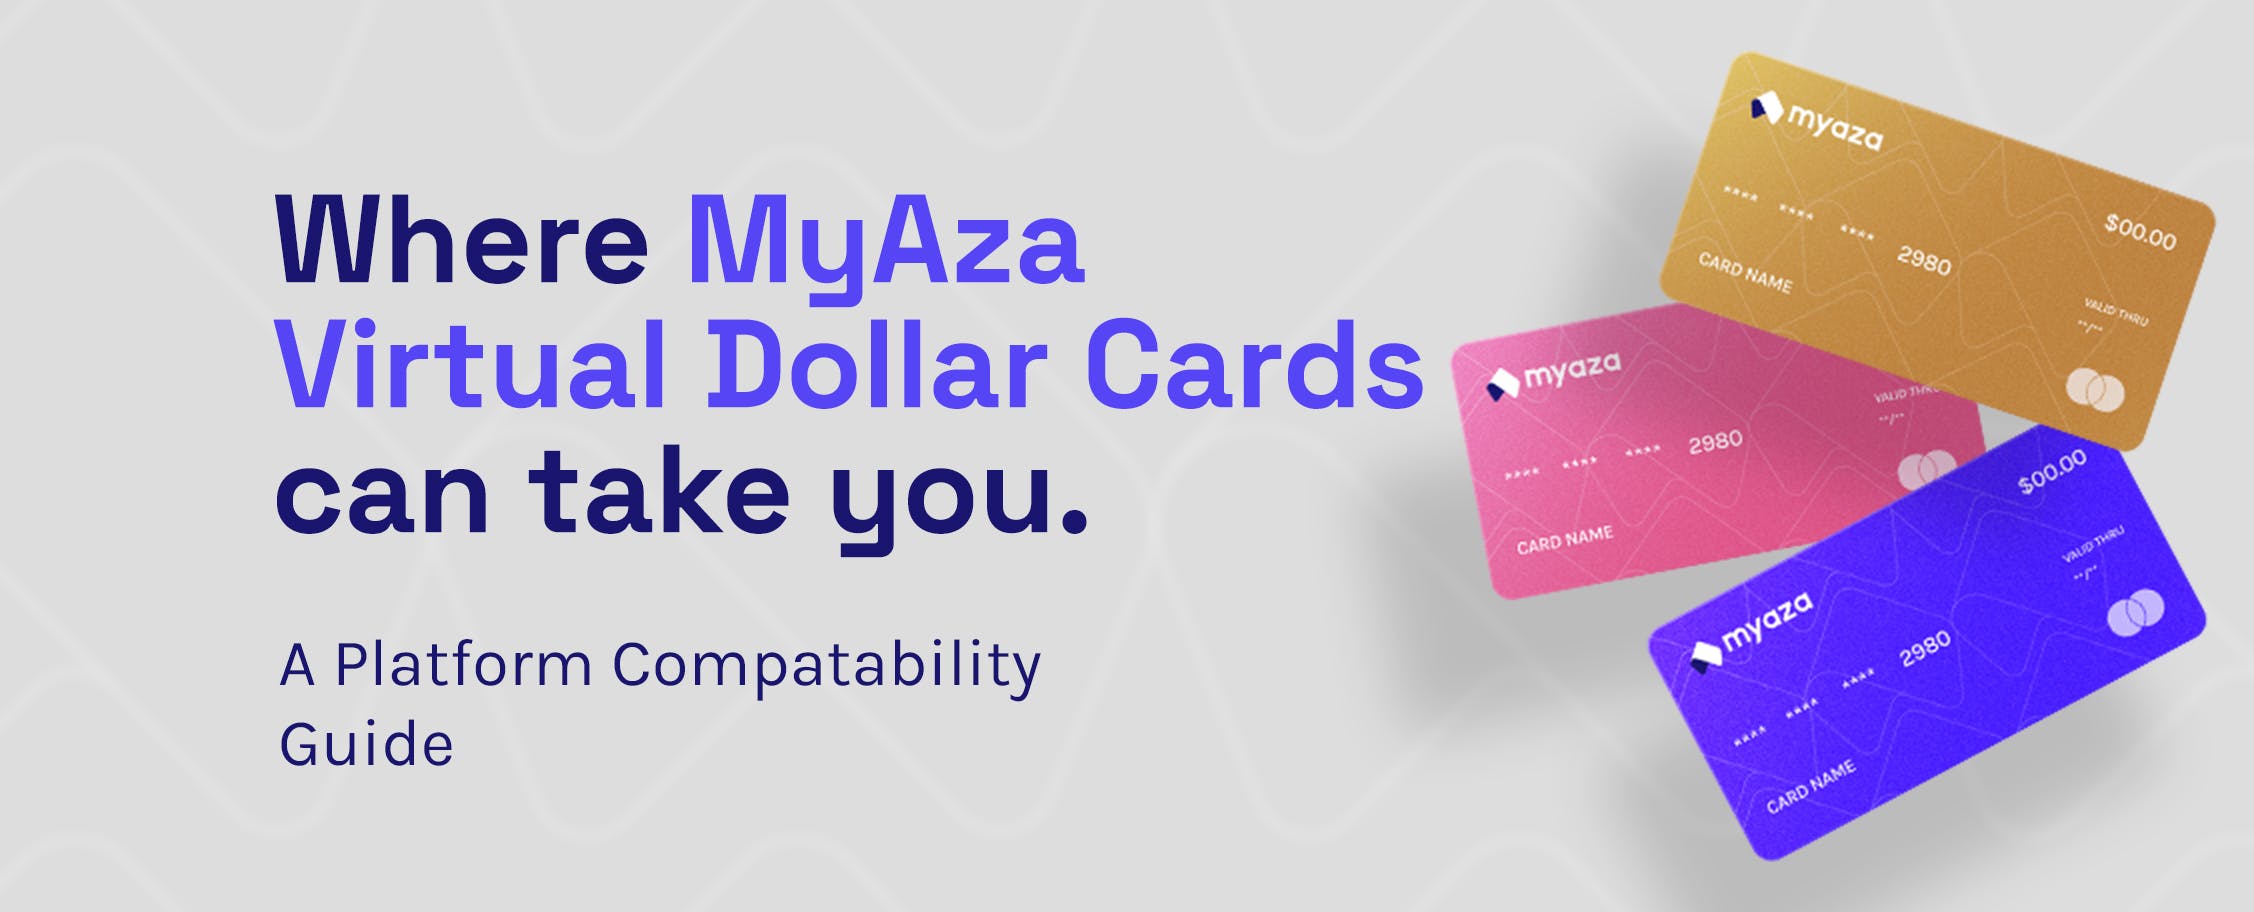 Where Myaza Virtual Dollar Cards Can Take You: A Platform Compatibility Guide